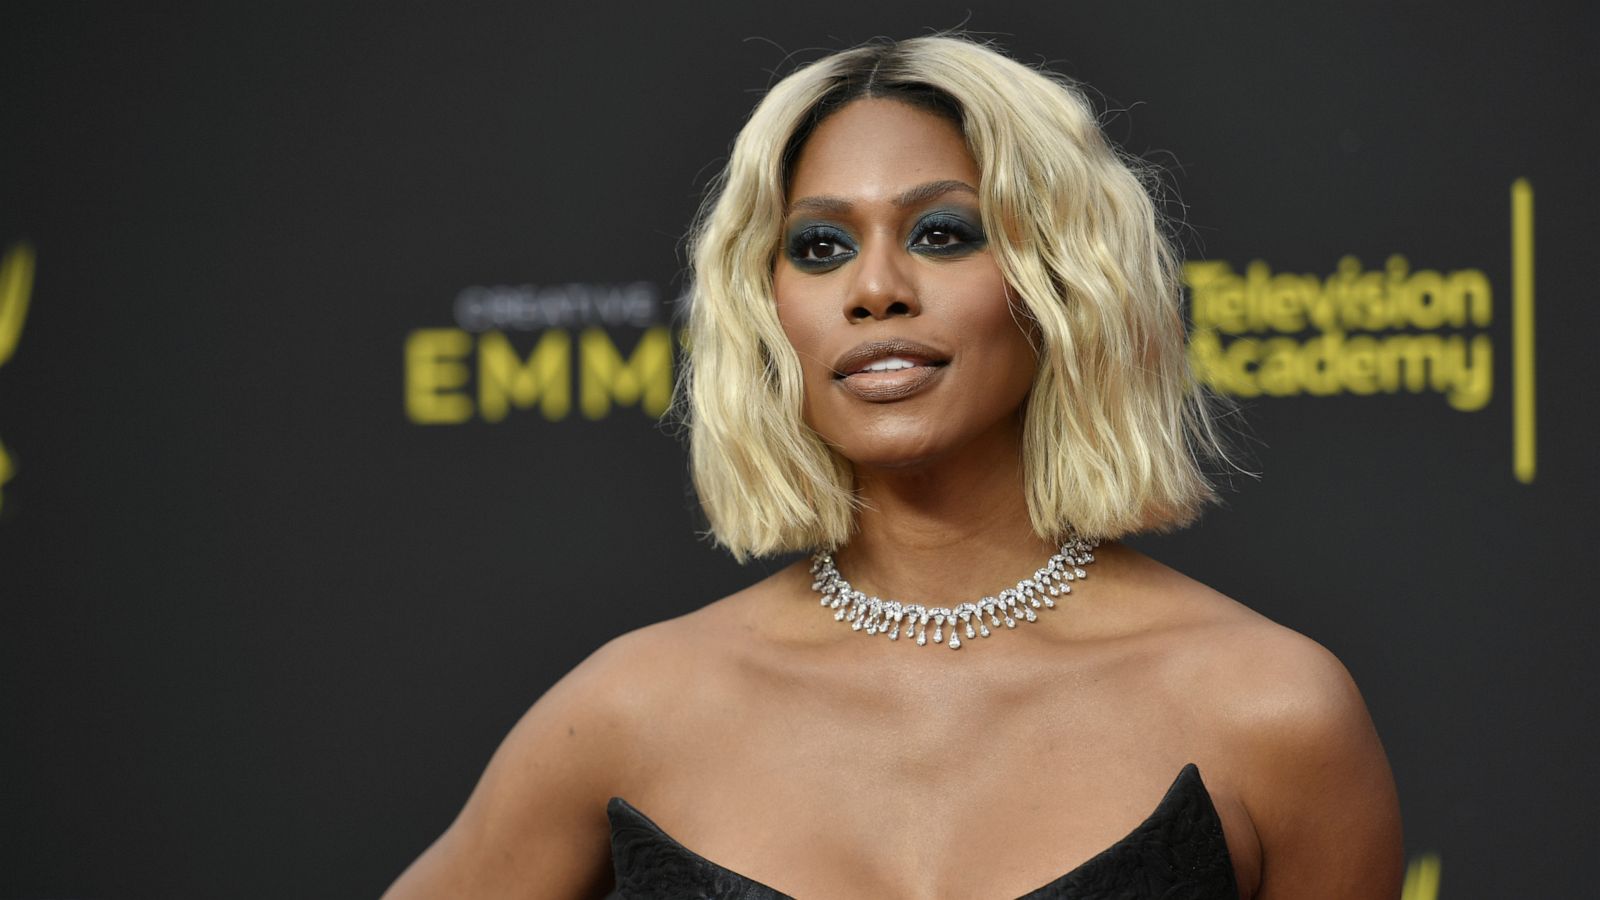 Laverne Cox could make history as 1st transgender actress to win